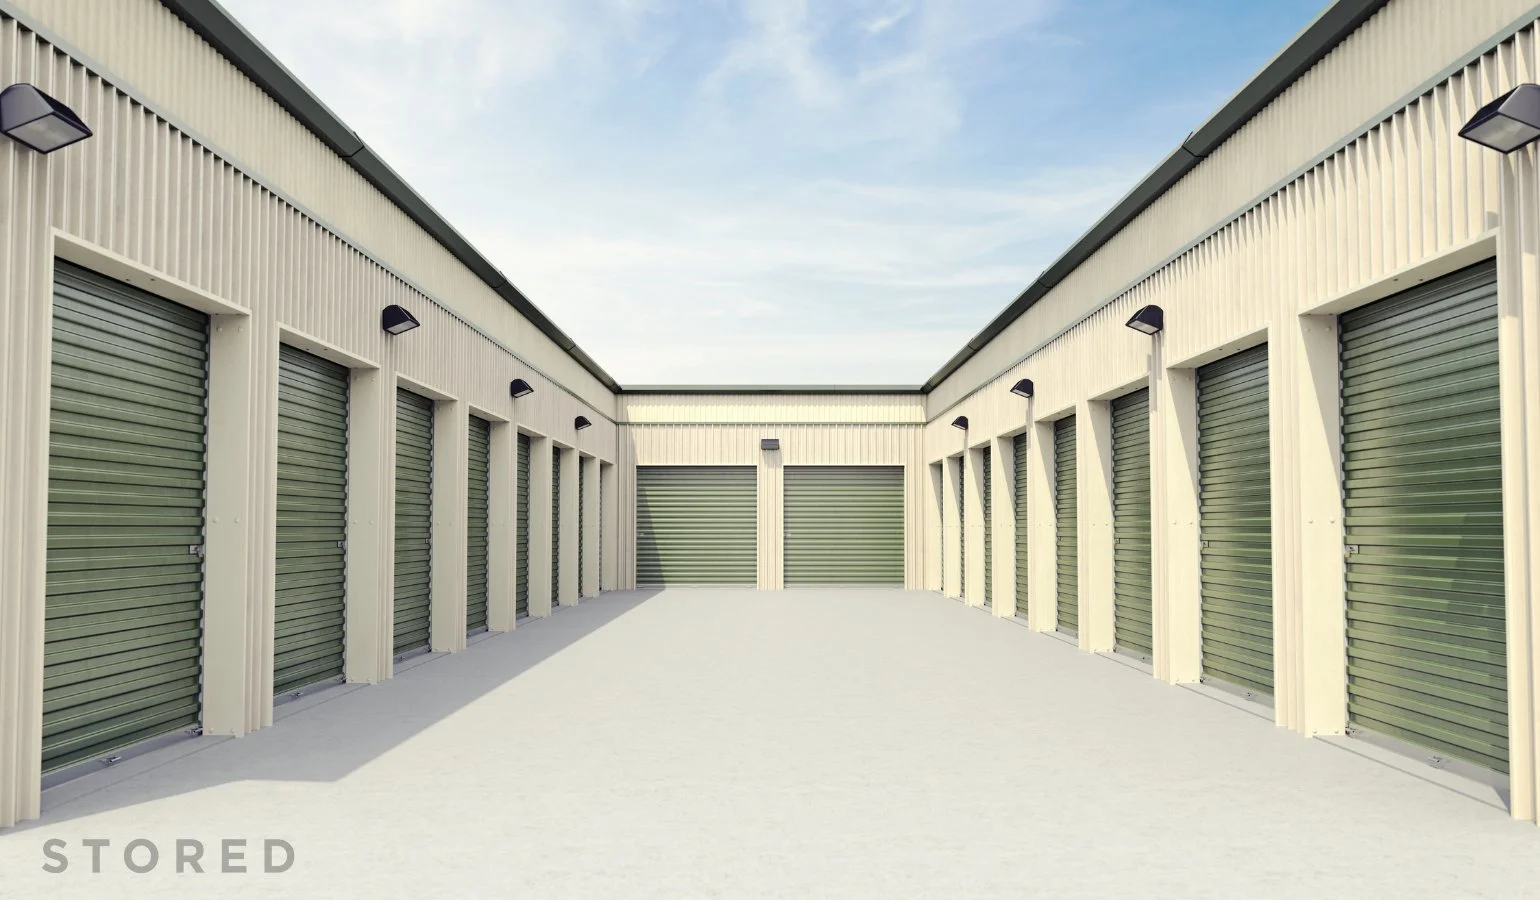 How to Choose the Right Storage Unit Size?